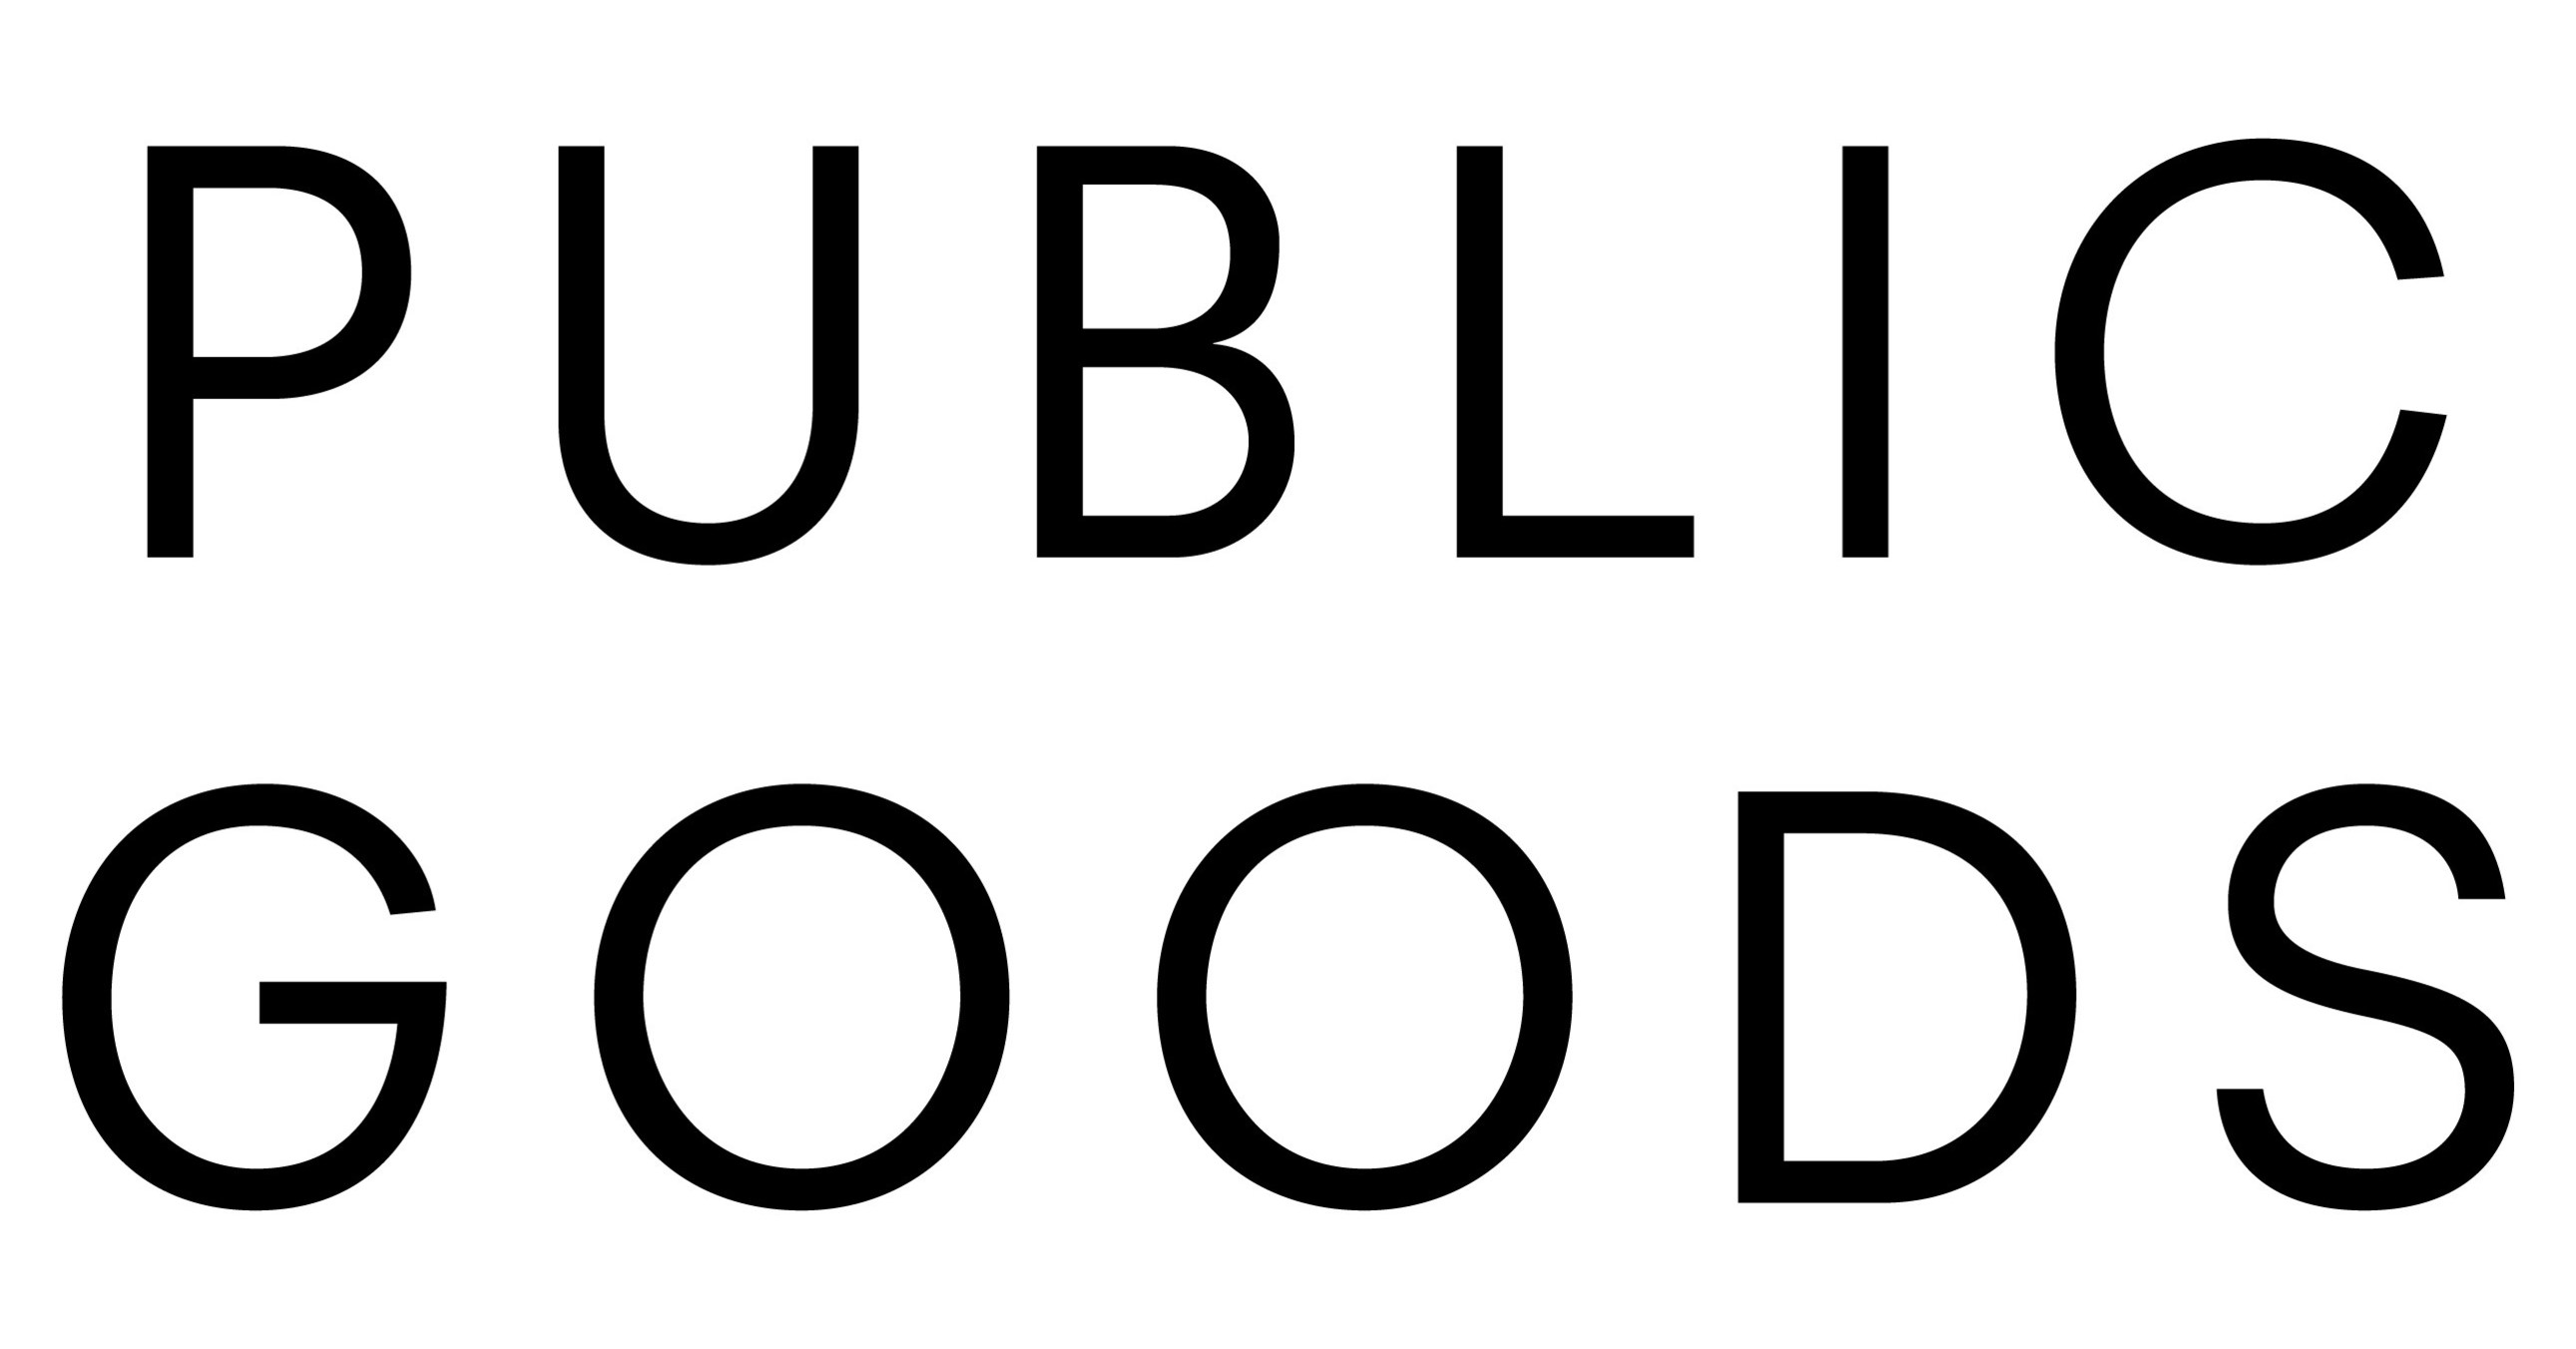 Public Goods Receives Strategic Significant Investment From L Catterton's  Growth Fund